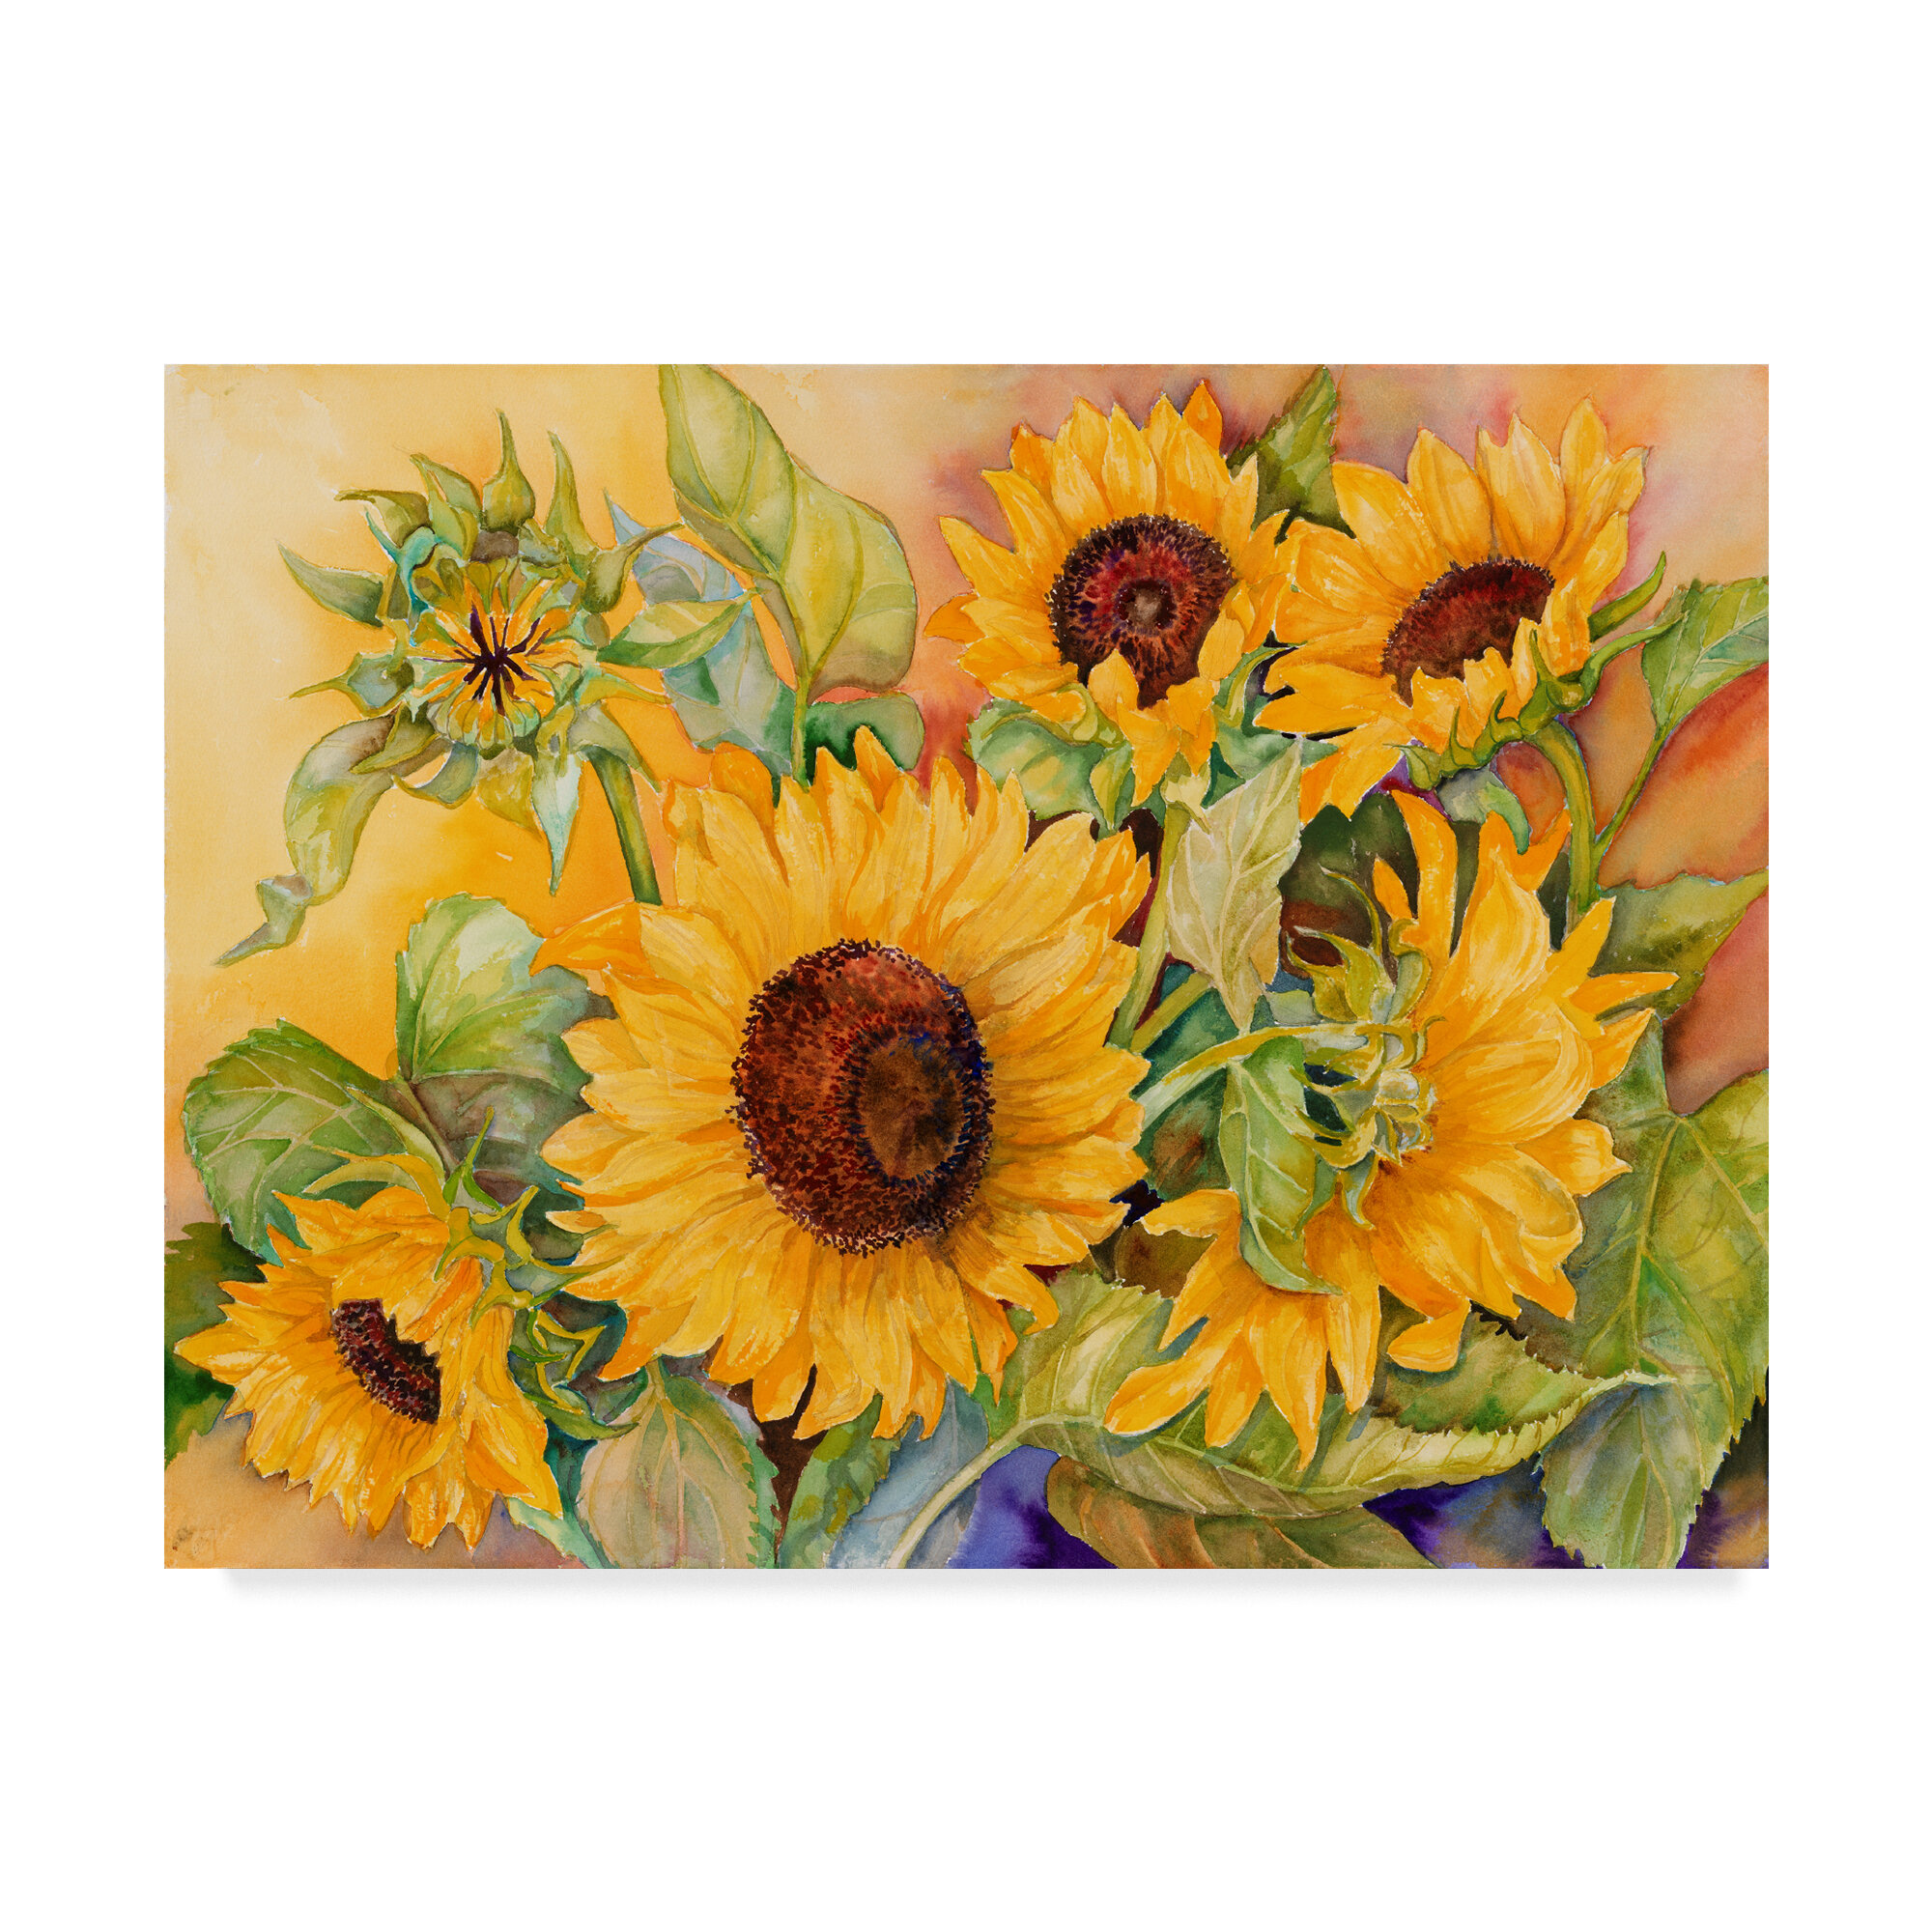 Trademark Art A Cutting Of Sunflowers Acrylic Painting Print On